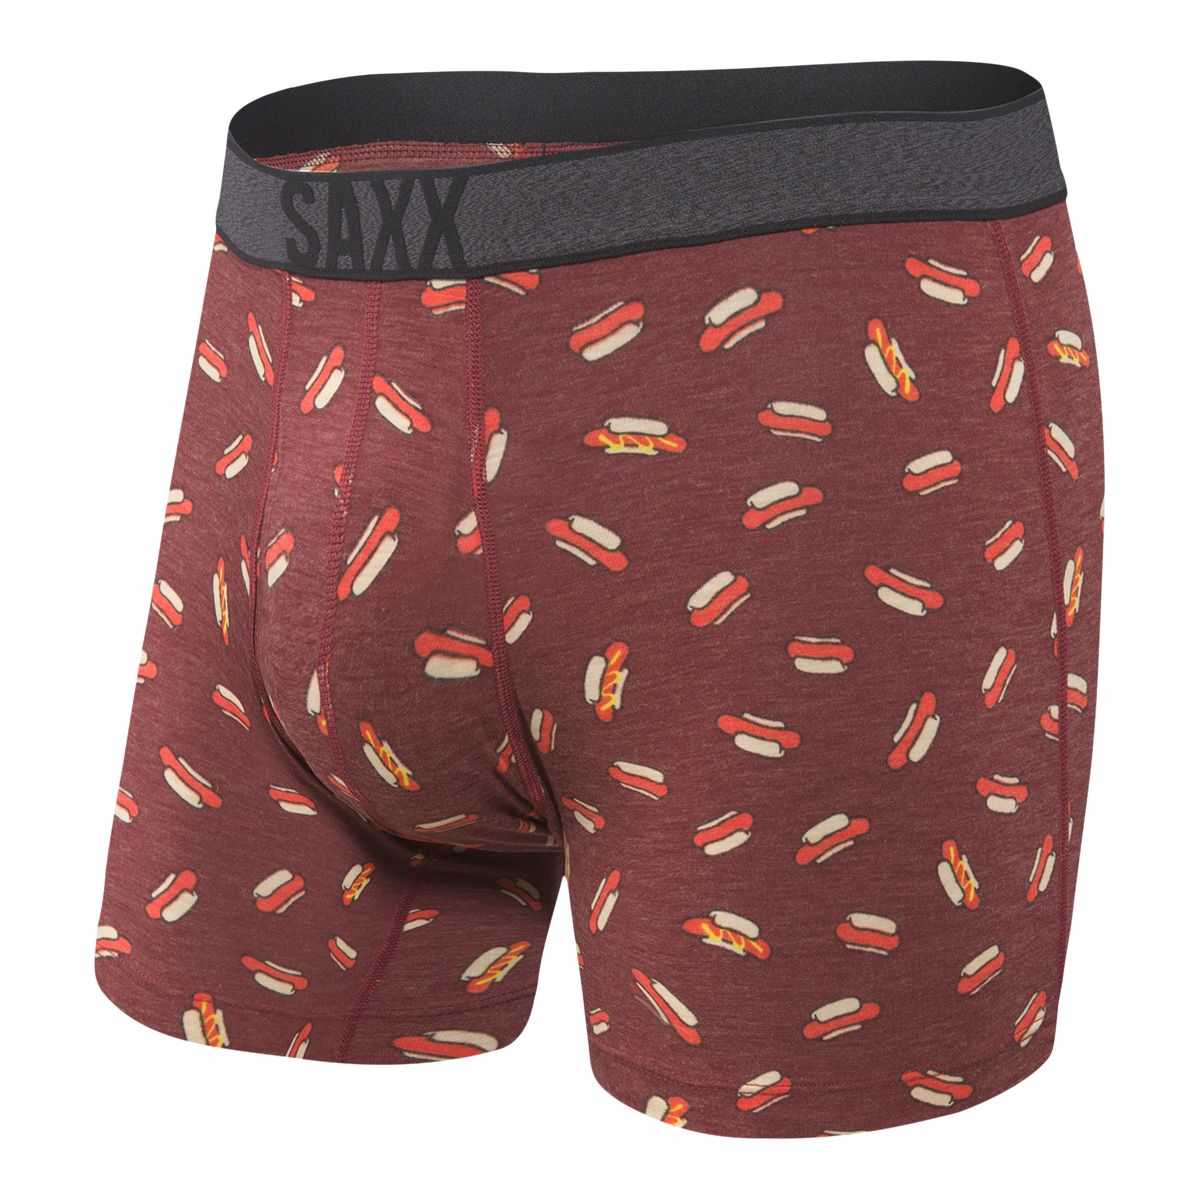 https://media-www.atmosphere.ca/product/div-03-softgoods/dpt-79-clothing-accessories/sdpt-01-mens/333160988/saxx-viewfinder-fly-boxer-bri-red-hot-diggityred-hot-diggity-s--a9a61ae1-4cb3-4c7a-bf31-735b352c0095-jpgrendition.jpg